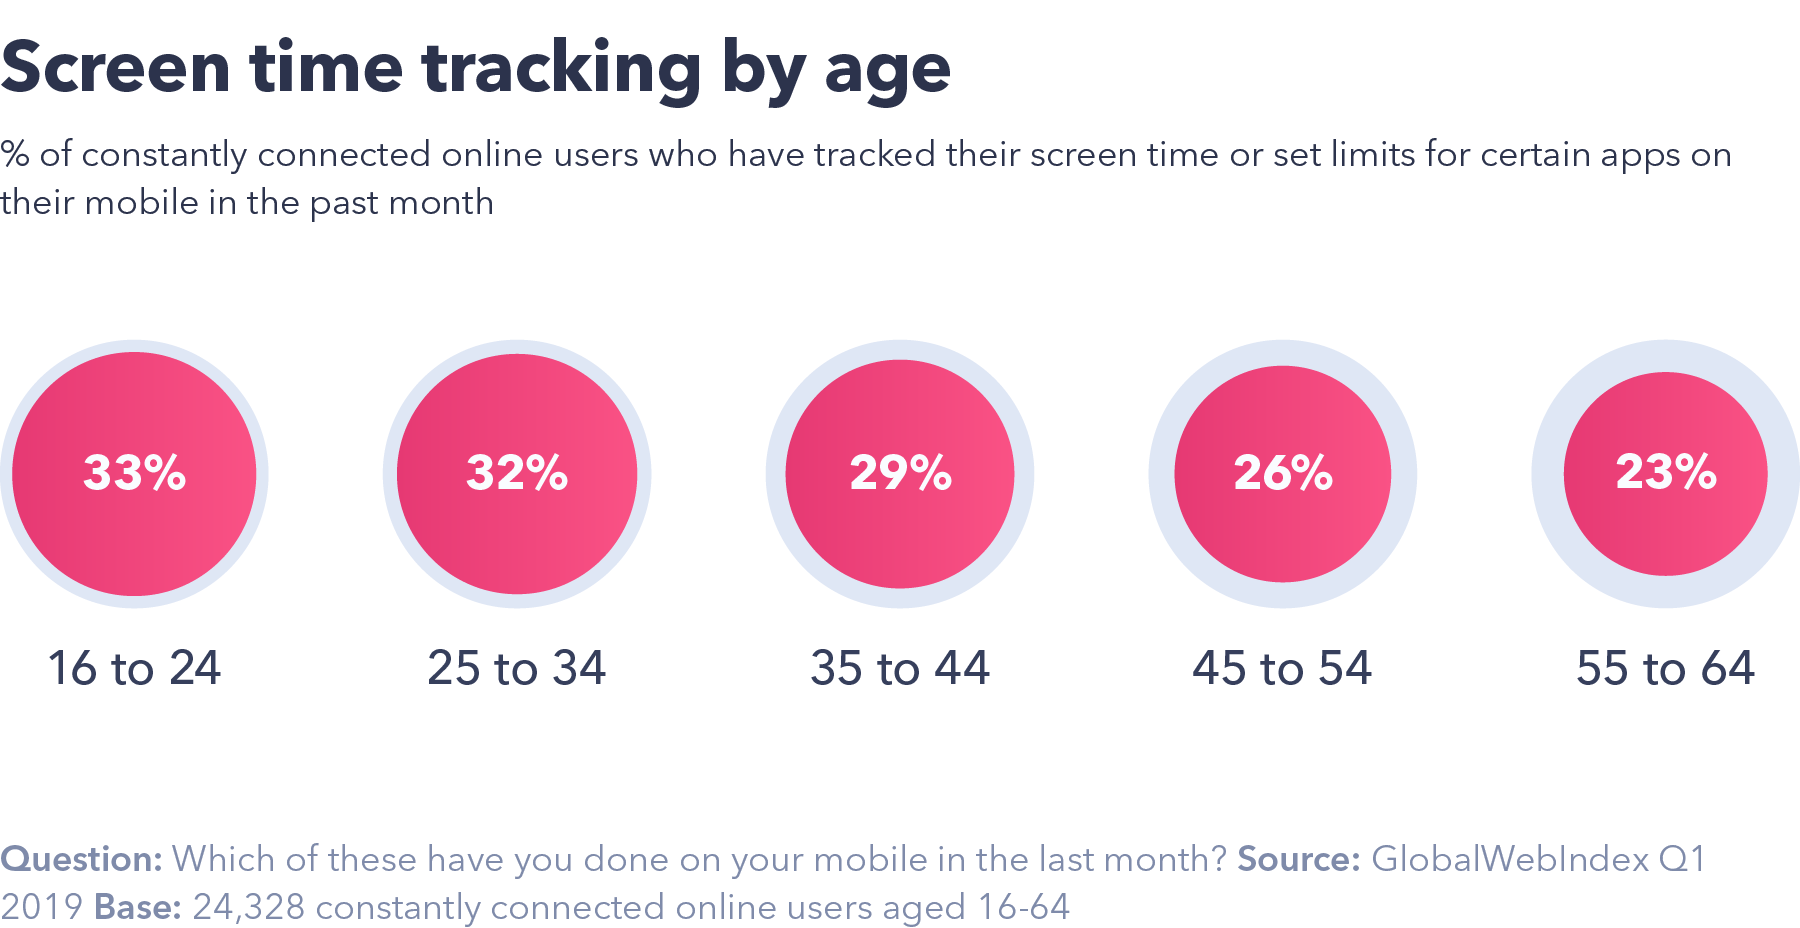 Screen time tracking by age